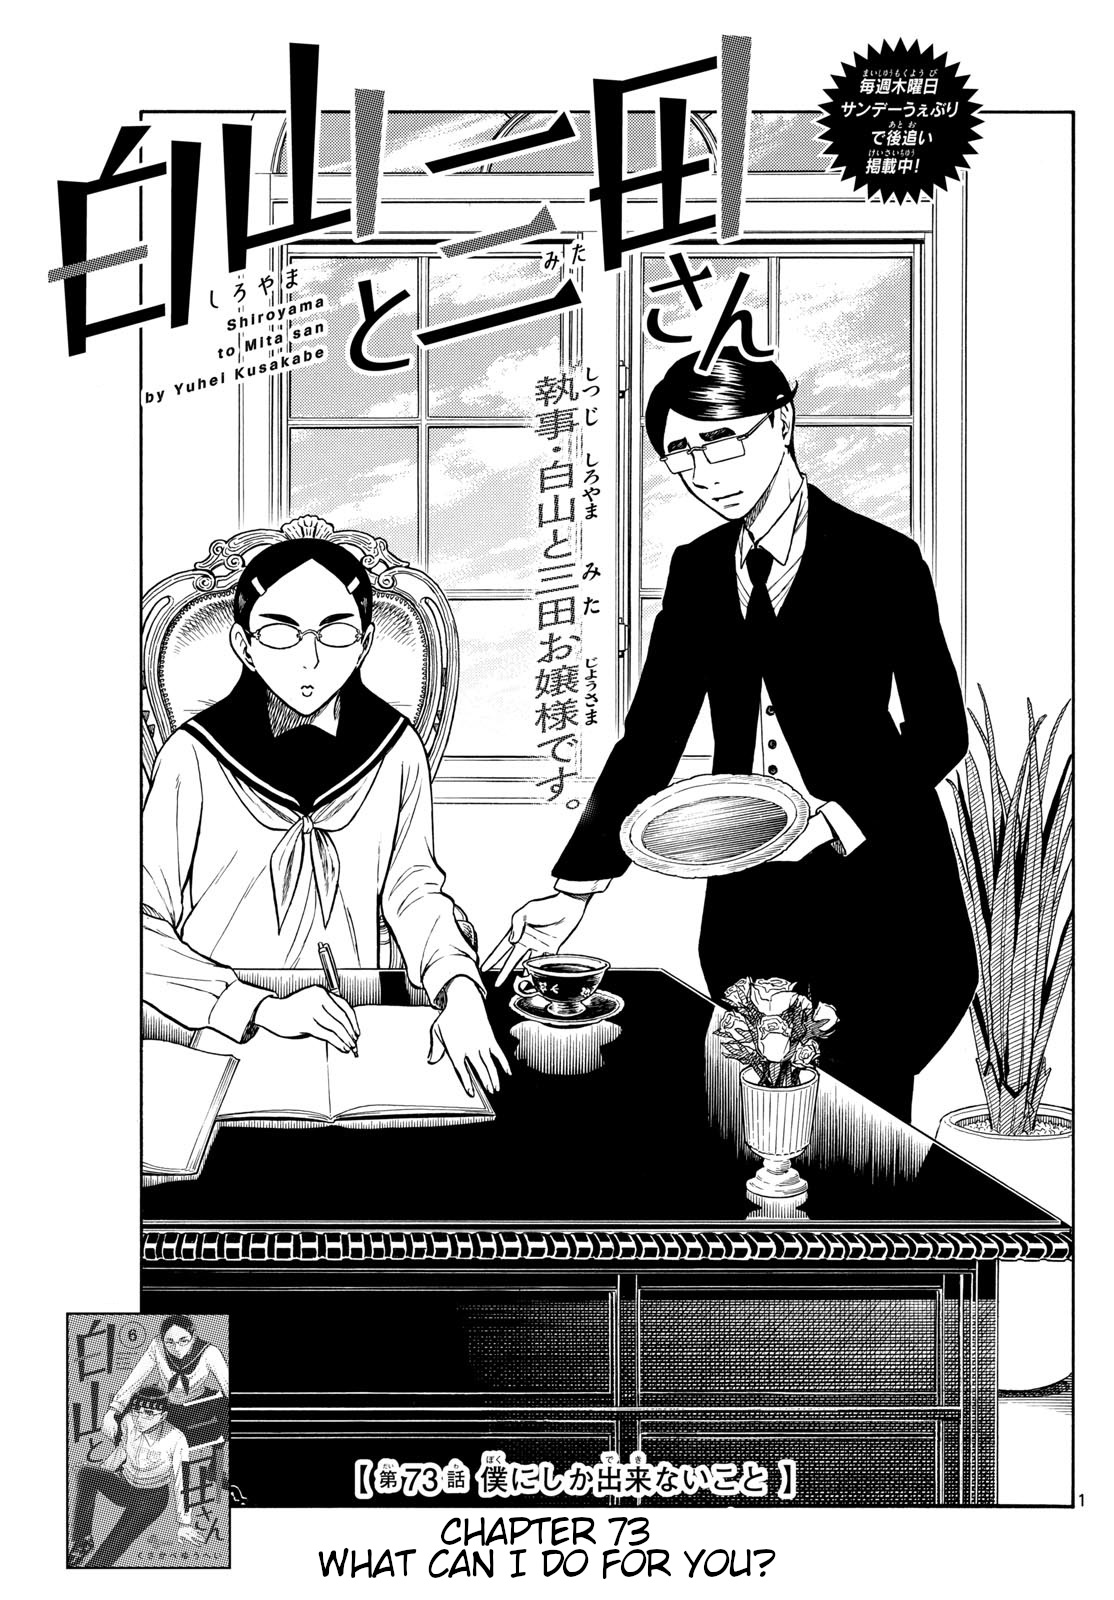 Shiroyama To Mita-San Chapter 73: What Can I Do For You? - Picture 1